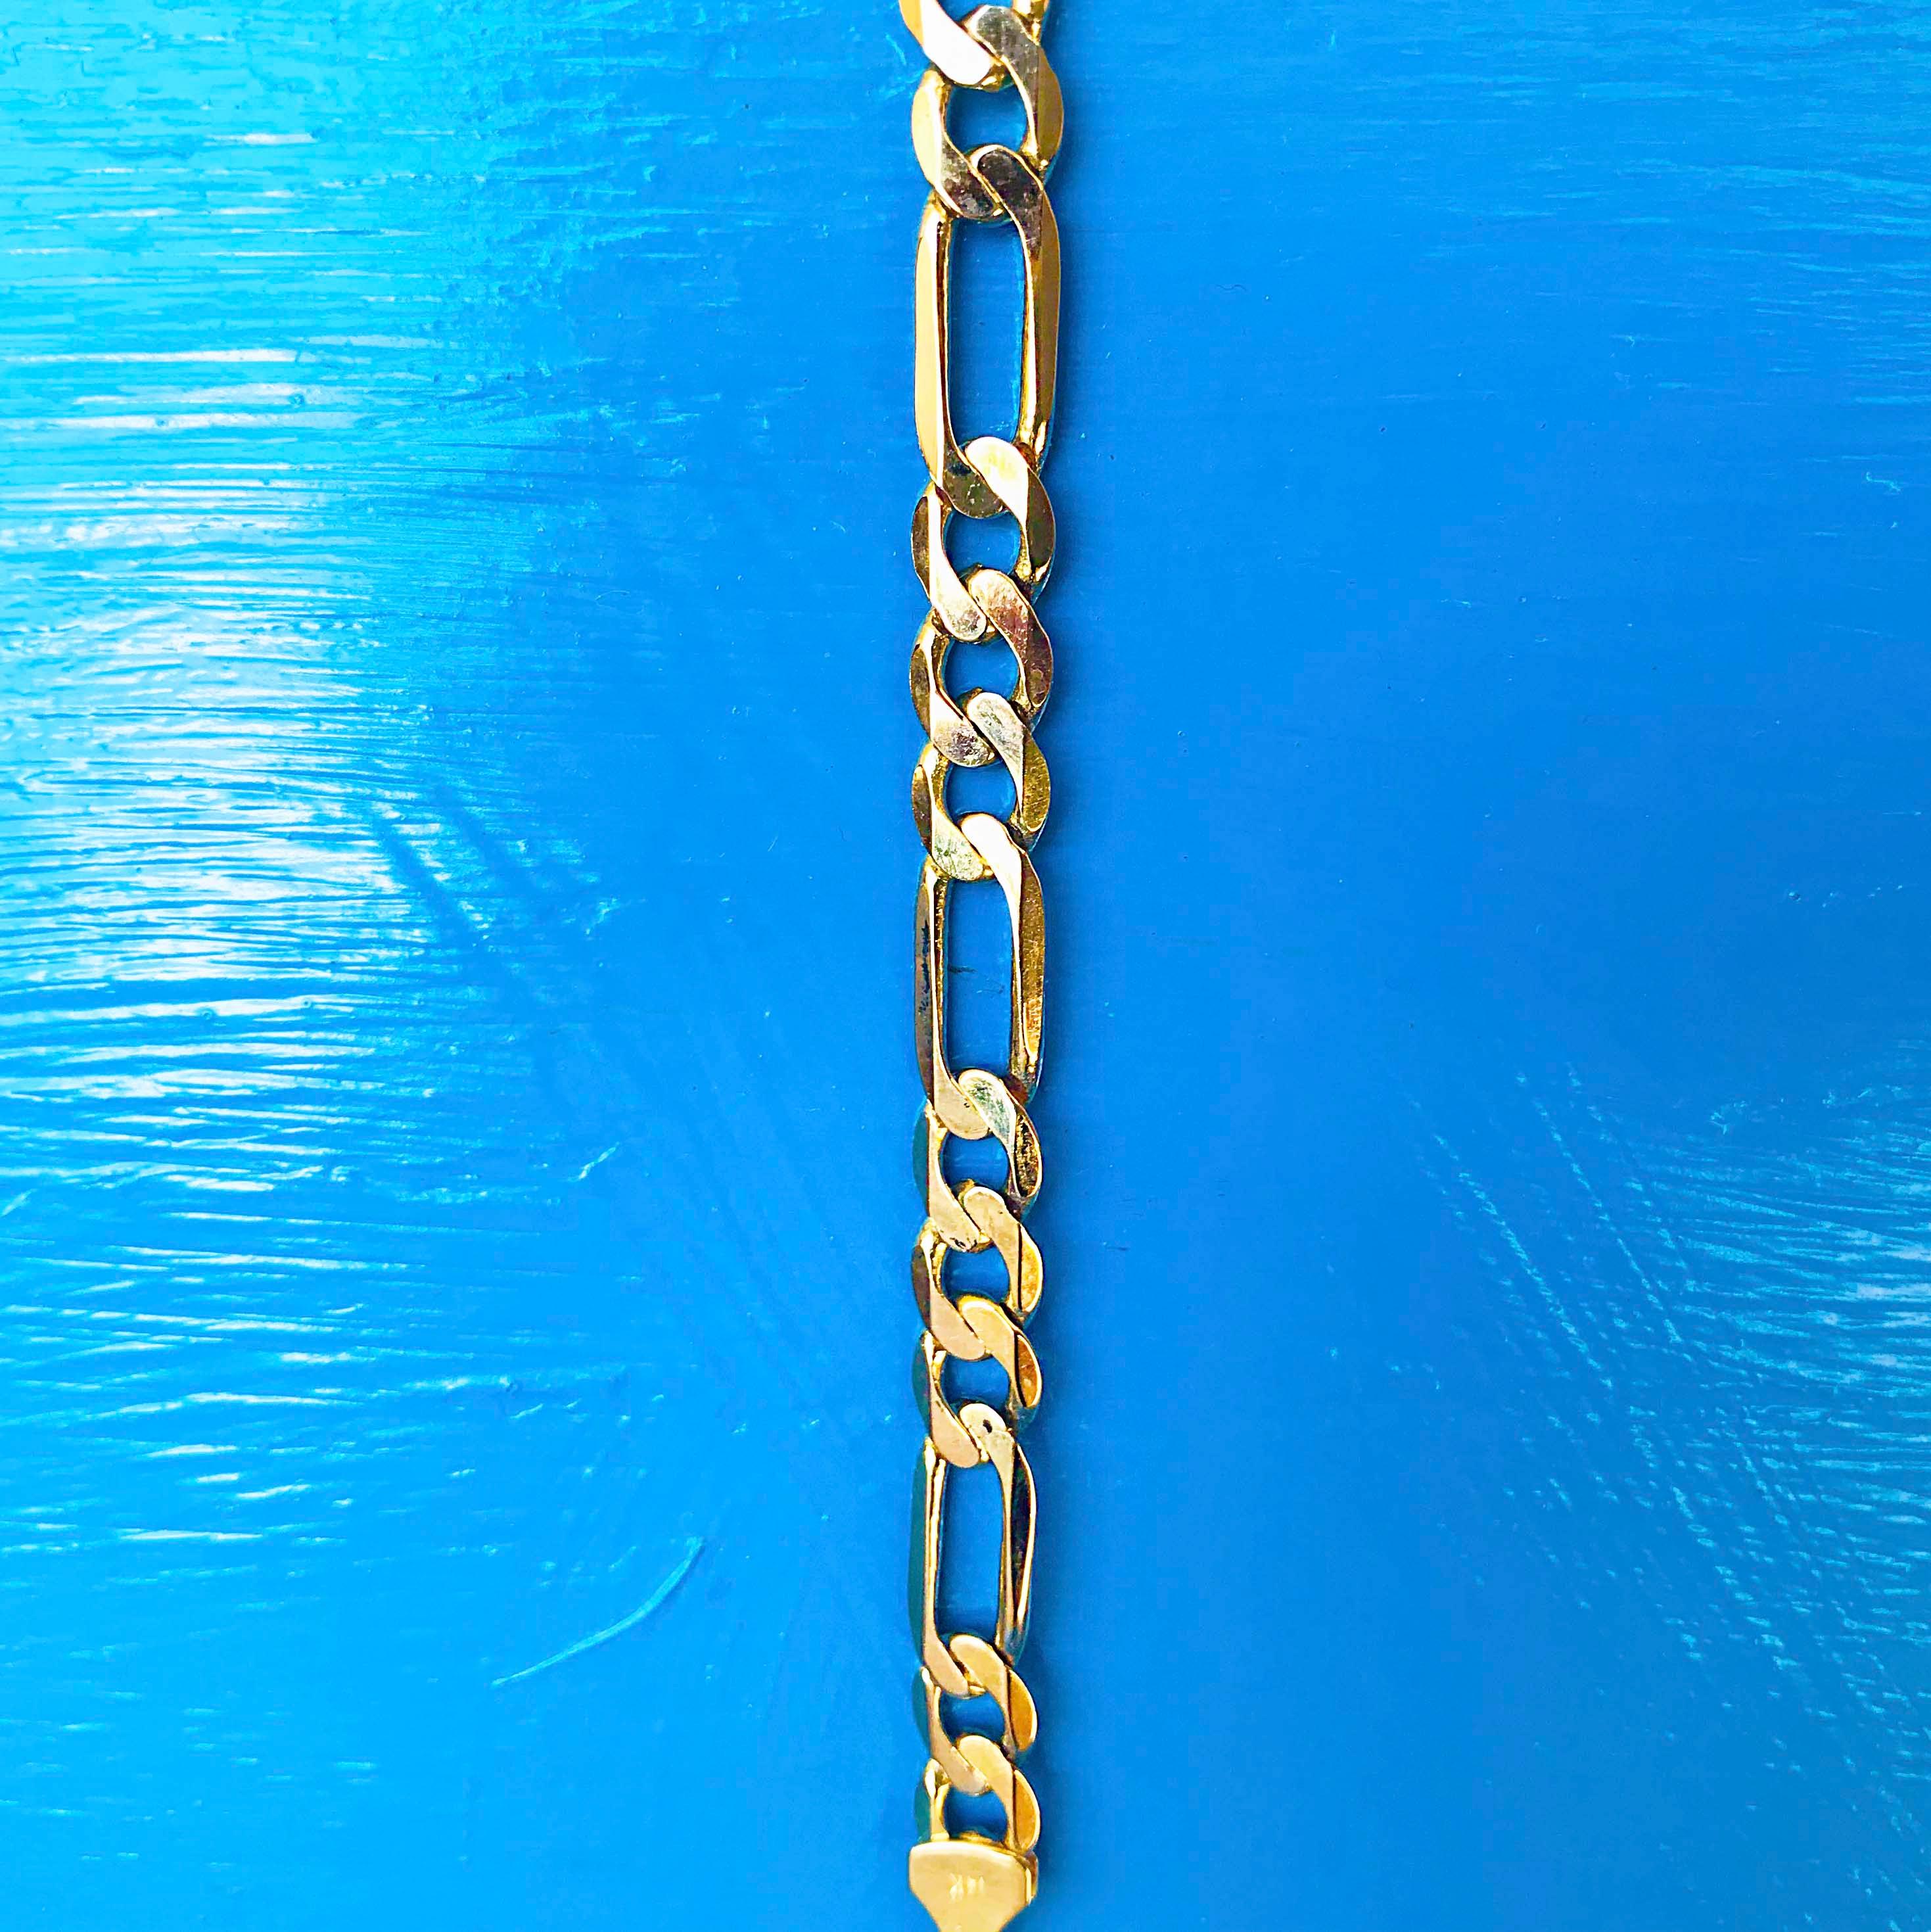 Heavy Figaro Chain Link Bracelet and Large Clasp, 14 Karat Gold 8 ...